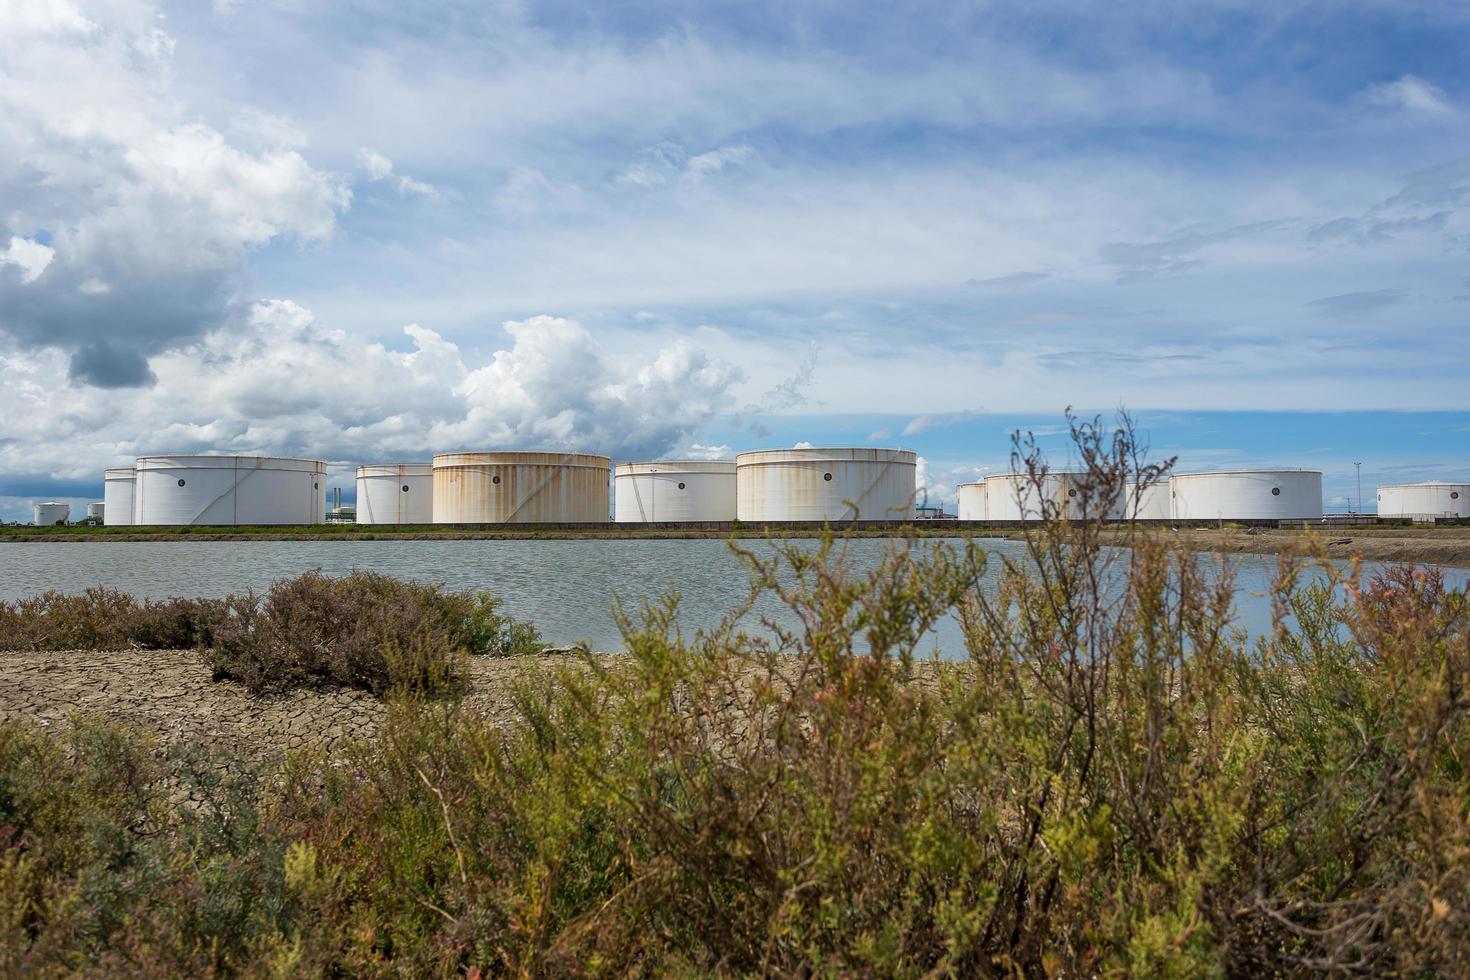 Oil tanks in a row under blue sky, Large white industrial tank for petrol, oil refinery plant. Energy and power photo